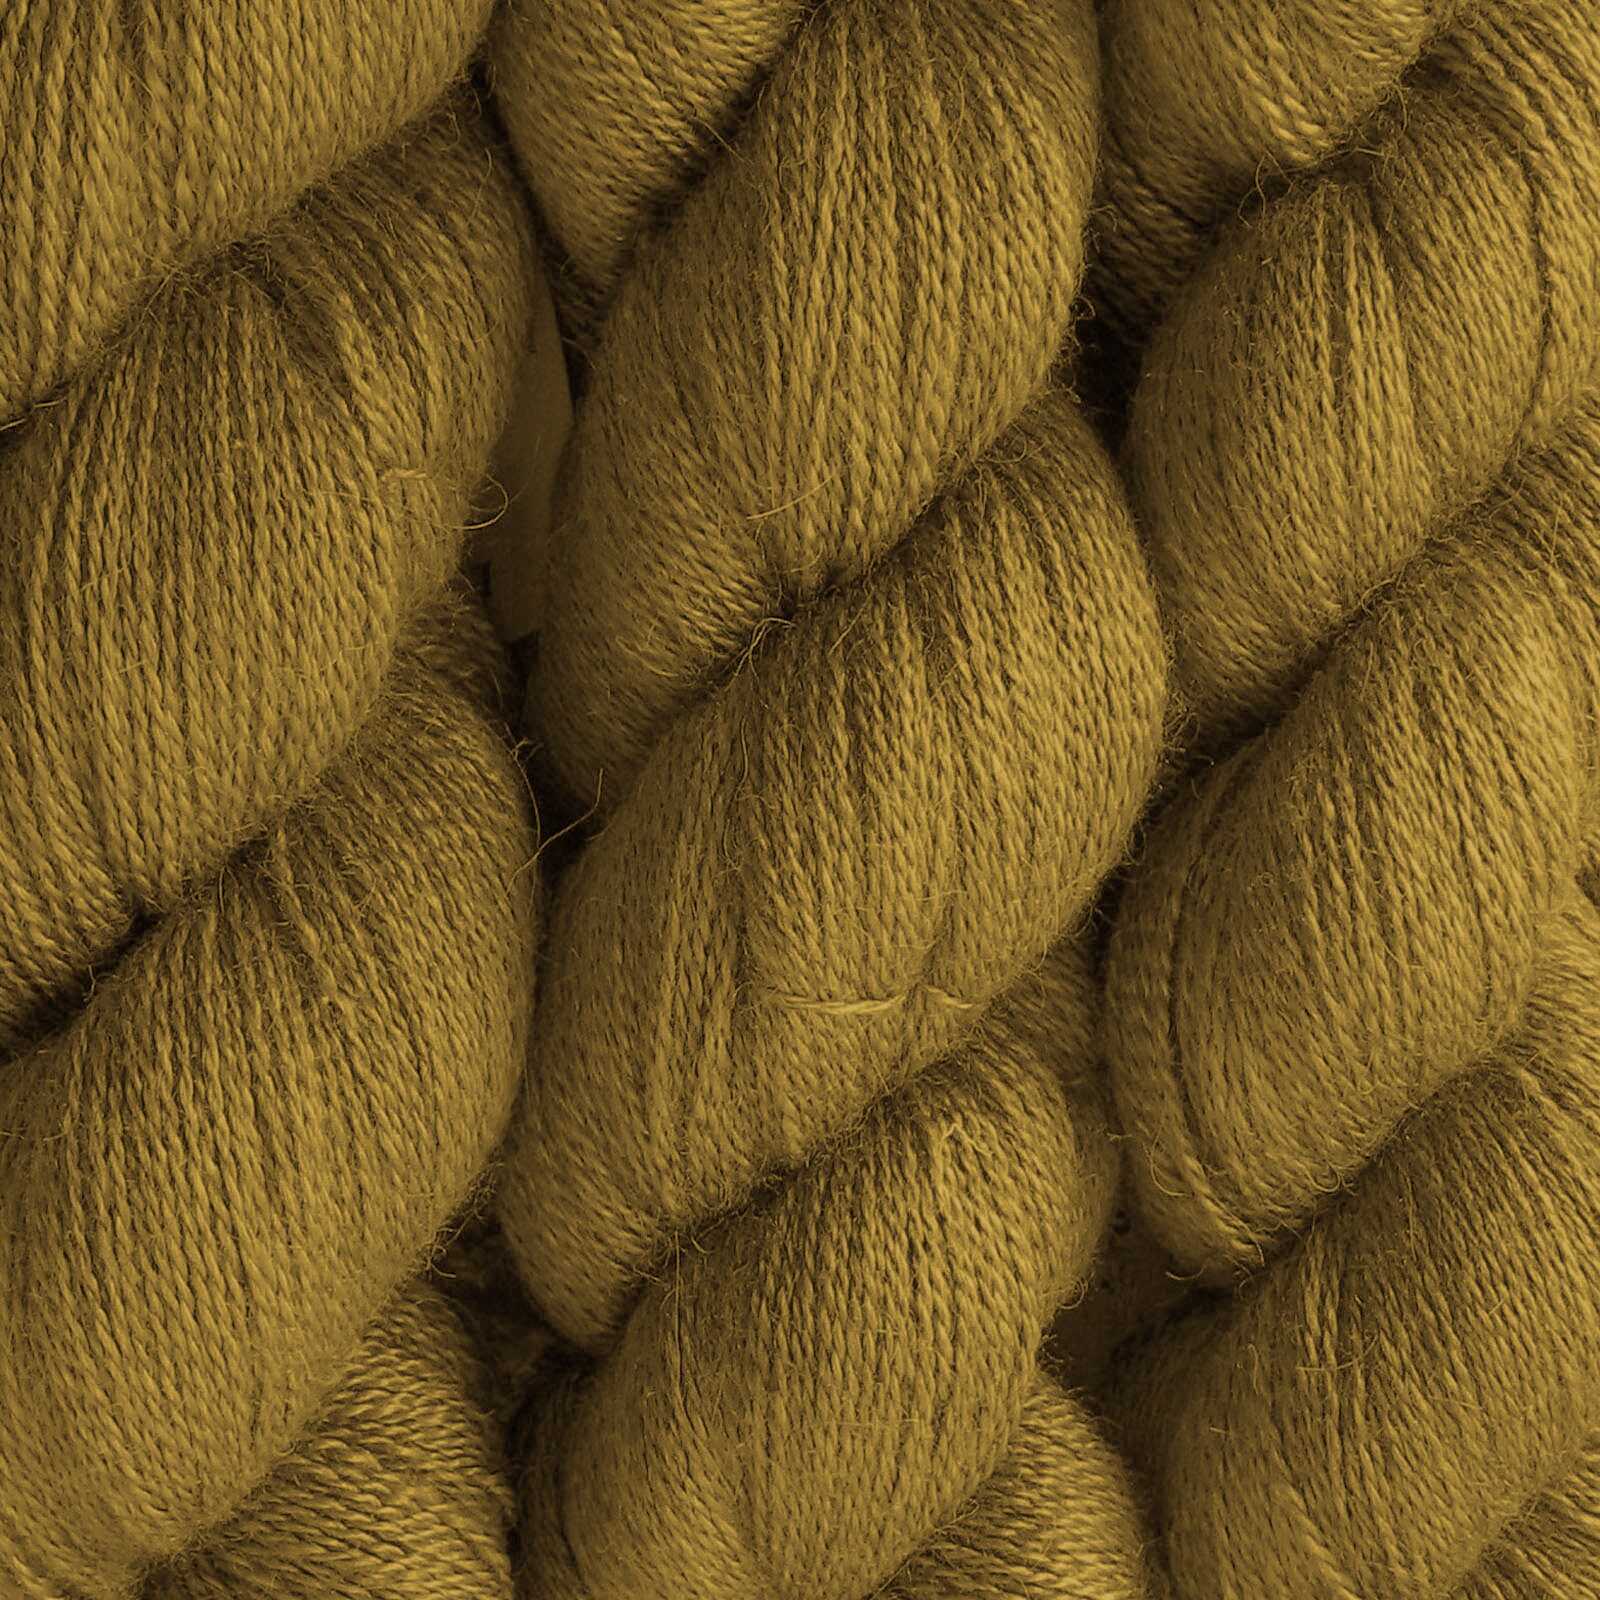 Brown Yarn - 4 Ball Pack - Quality Yarn For Your Proud Project